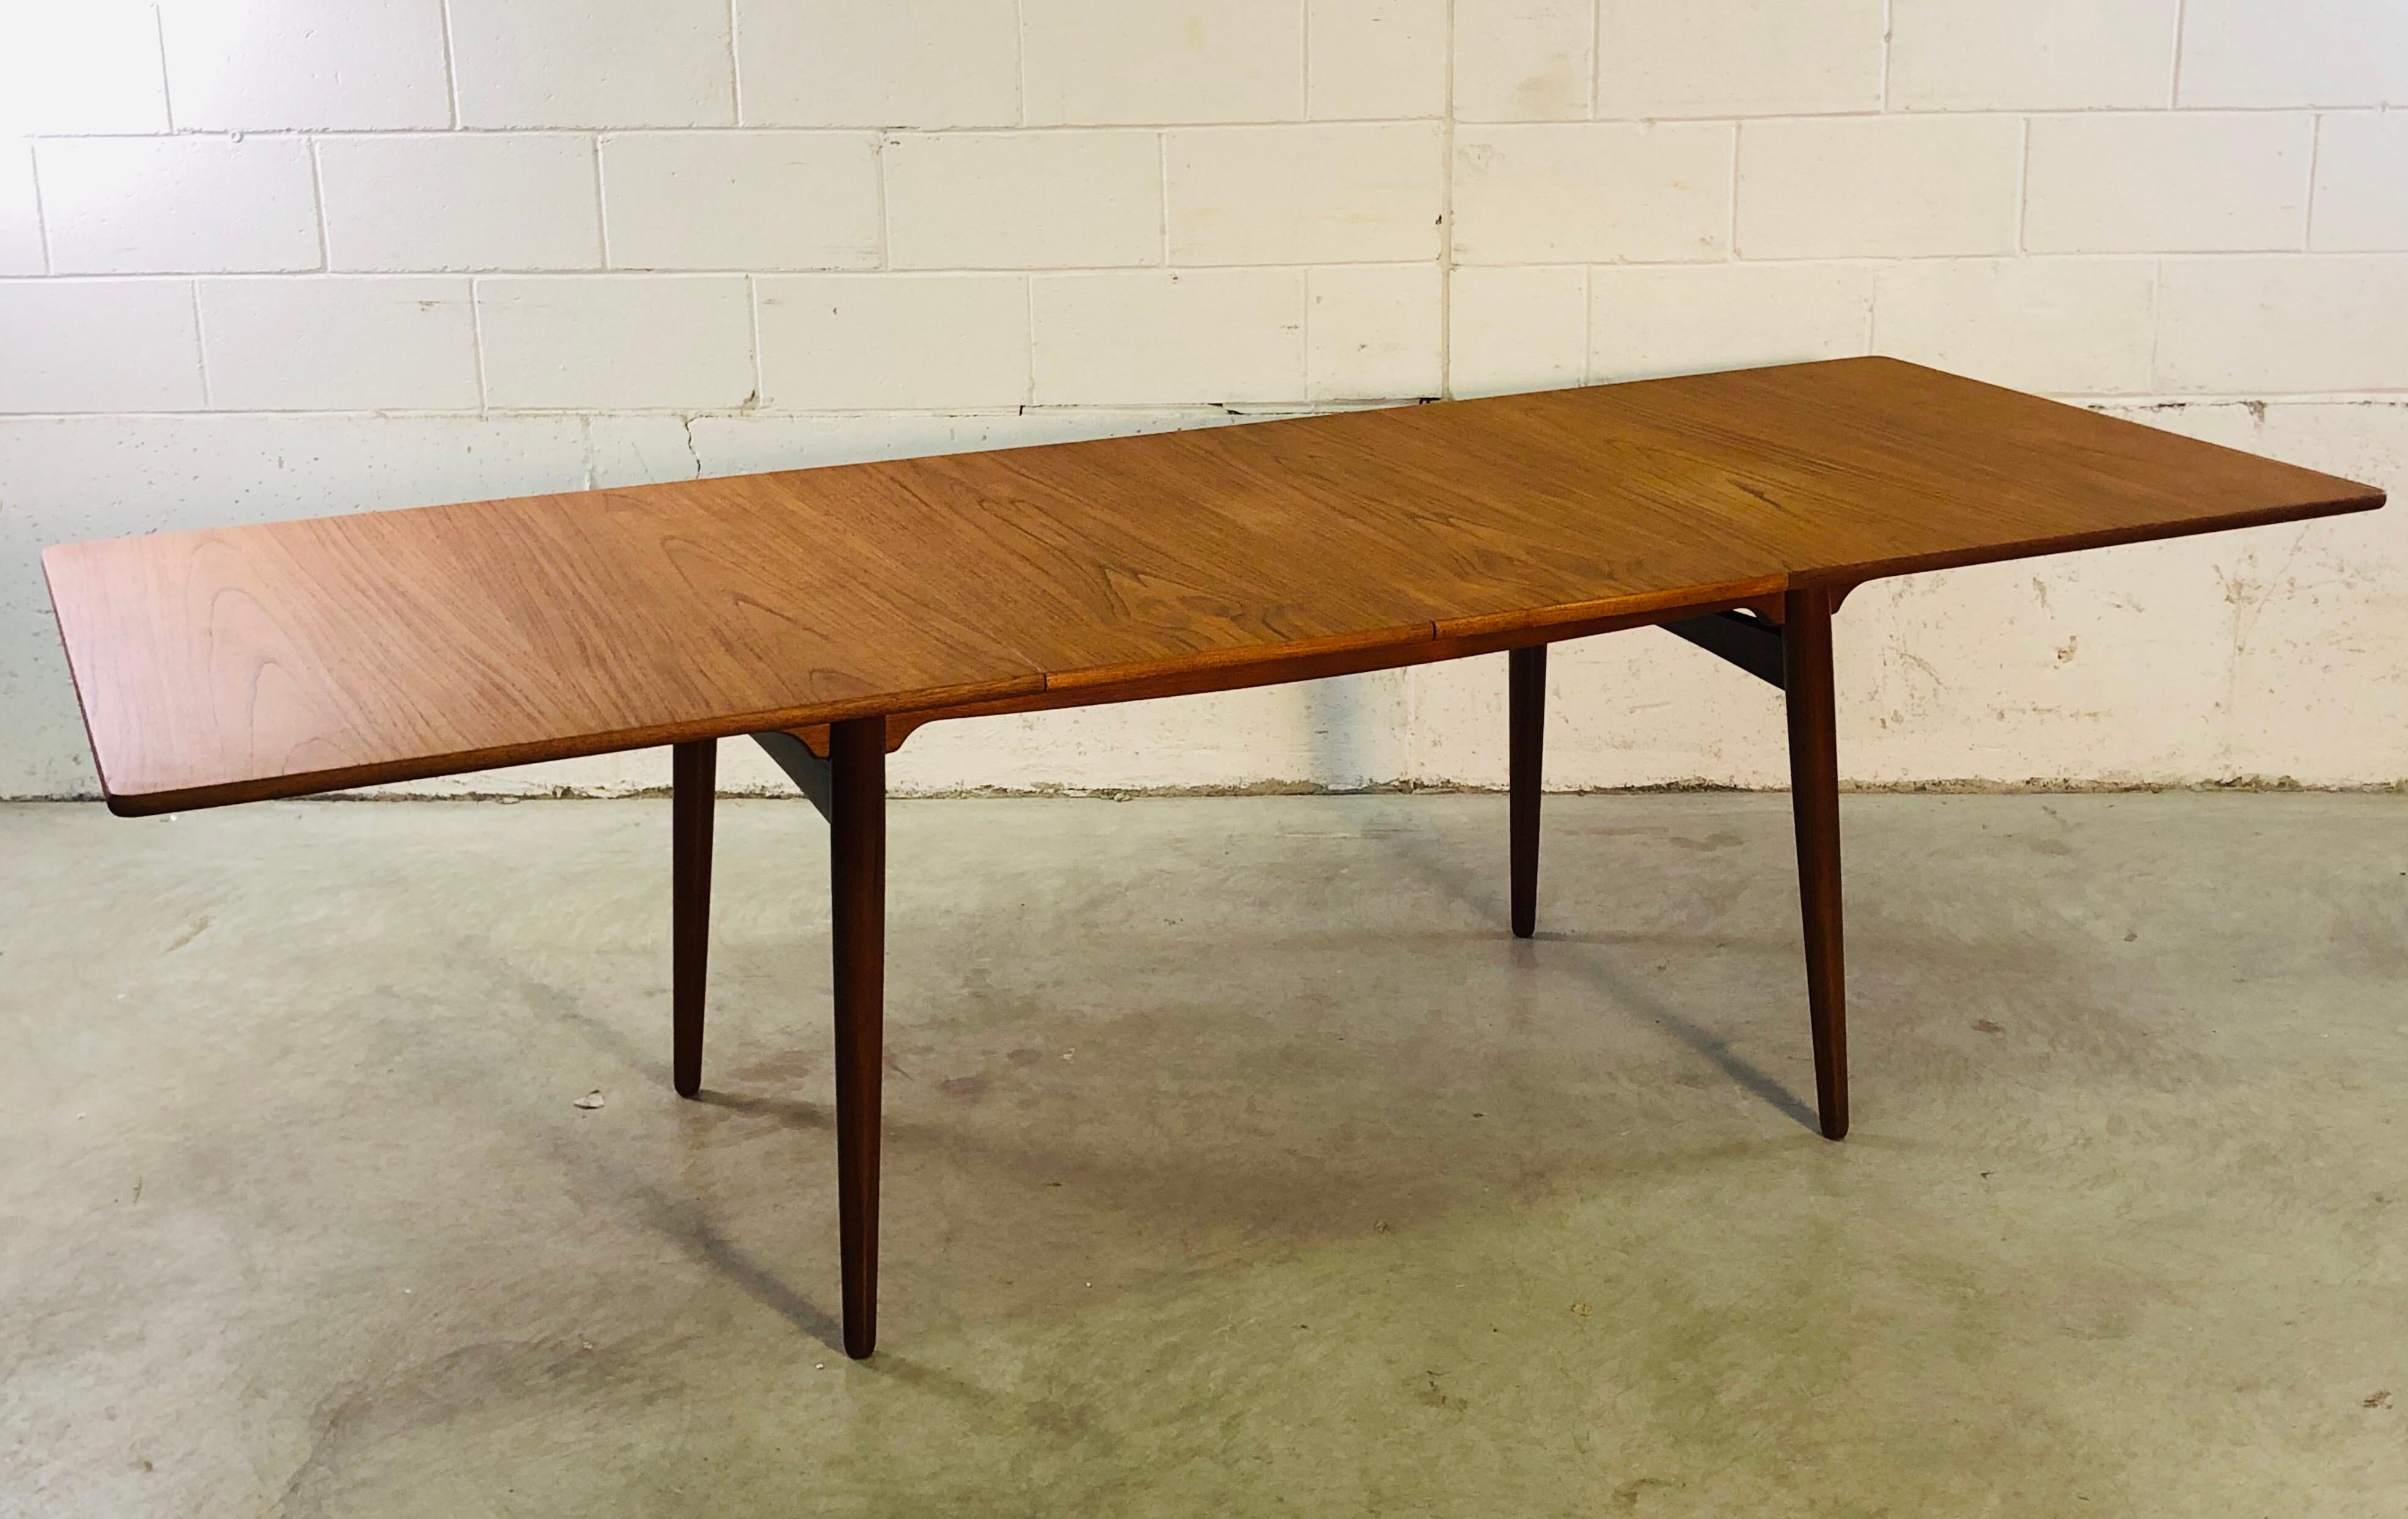 Vintage Danish teak dining room table designed by Hans J. Wegner for Andreas Tuck. This table model is AT-310. The table comes with two extra boards, each 15.75” L. Fully opened the table is 94” L. Marked underneath. Refinished condition.